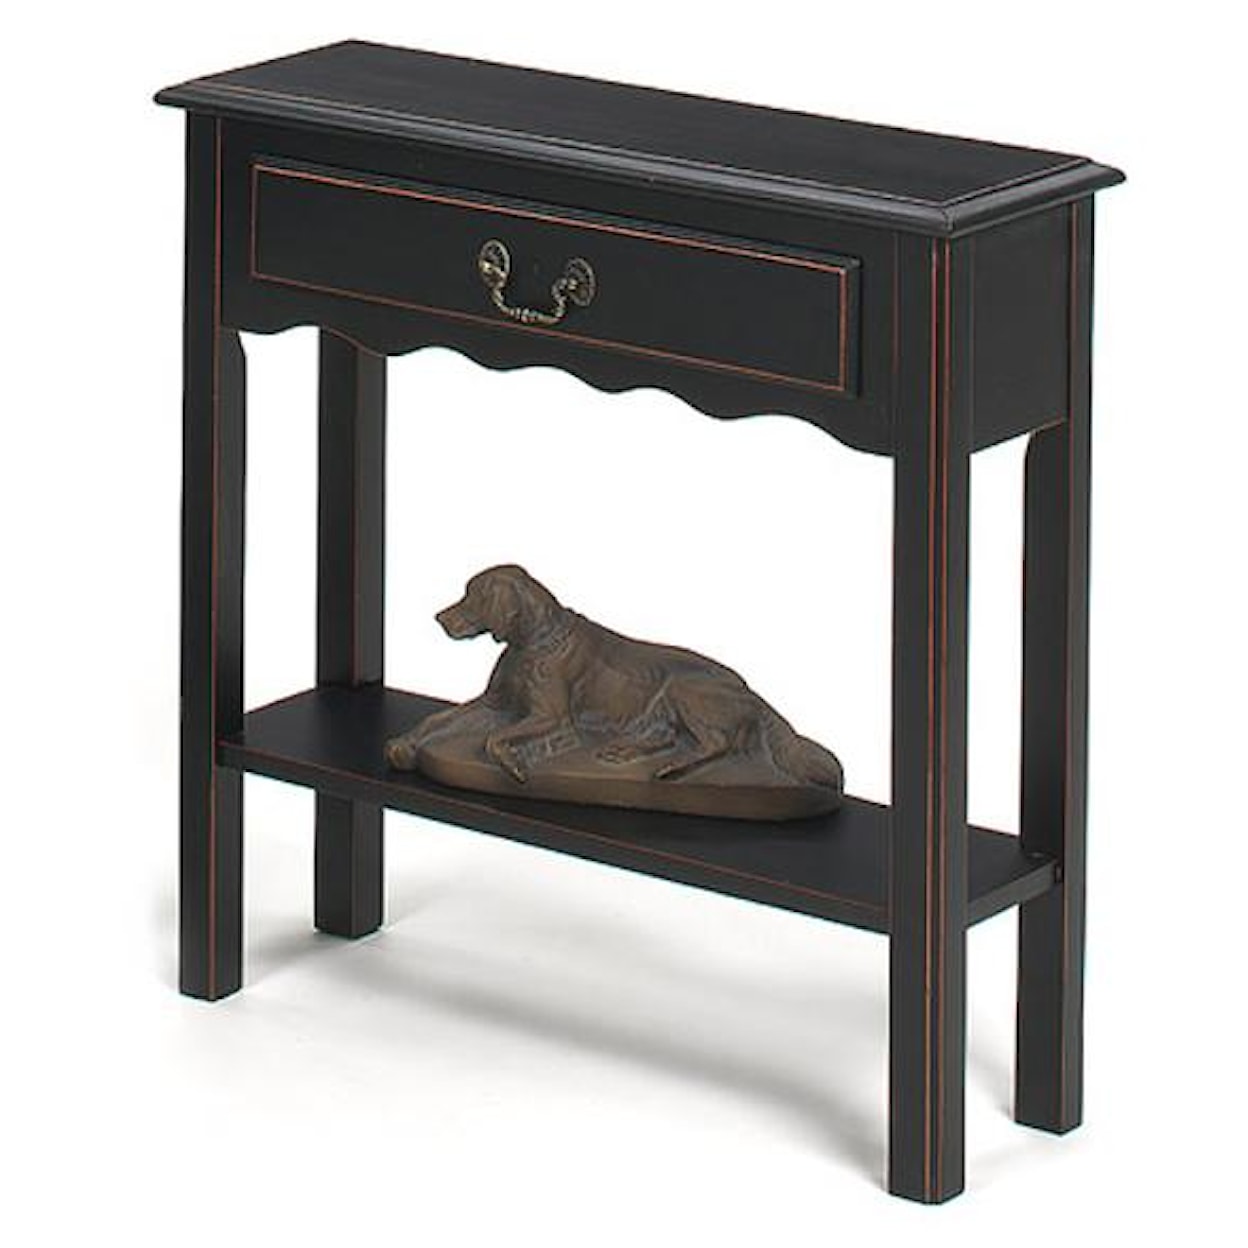 Null Furniture 1900 International Accents Petite Console Table